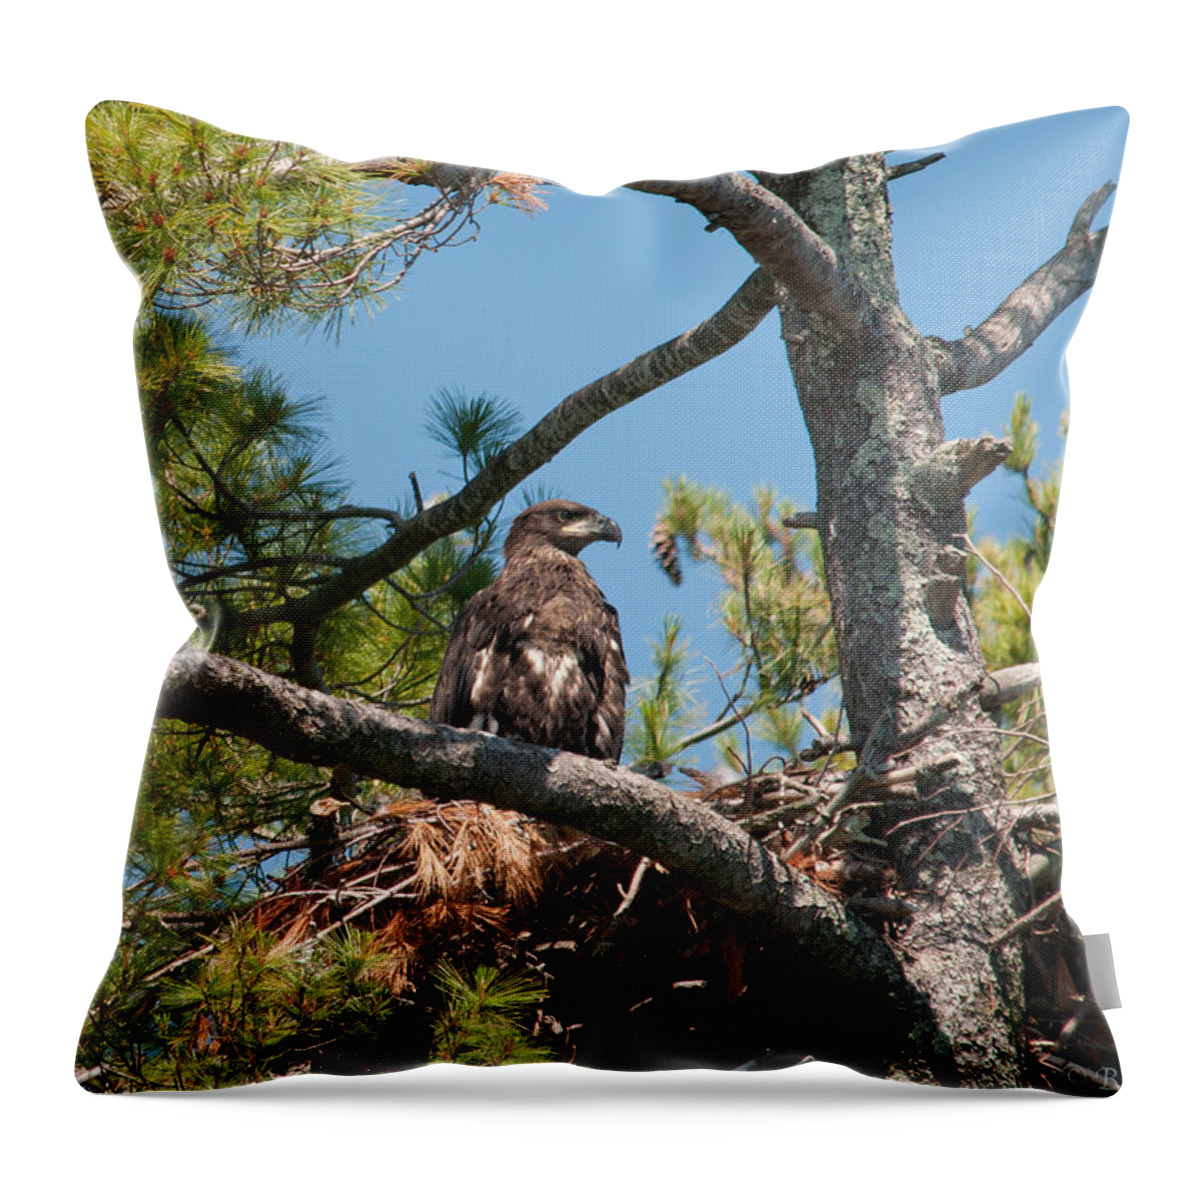 Bald Eagle Throw Pillow featuring the photograph Immature Bald Eagle by Brenda Jacobs